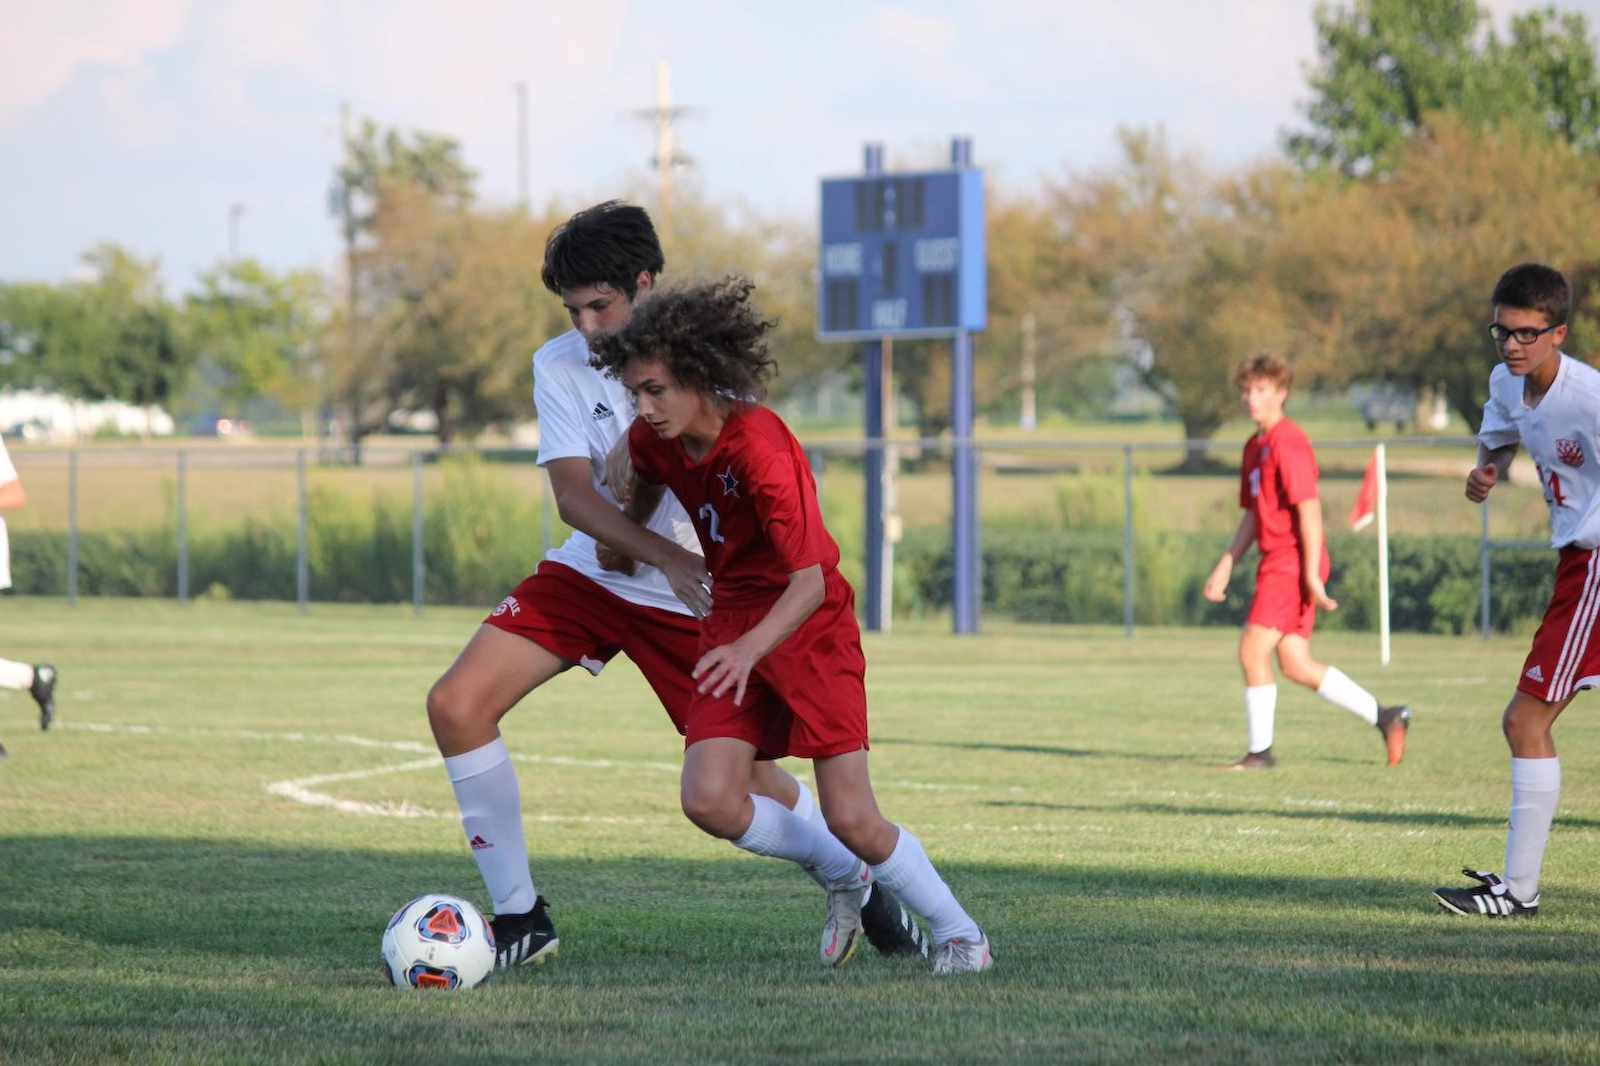 Boys soccer took on Crawfordsville in first match of the season cover photo